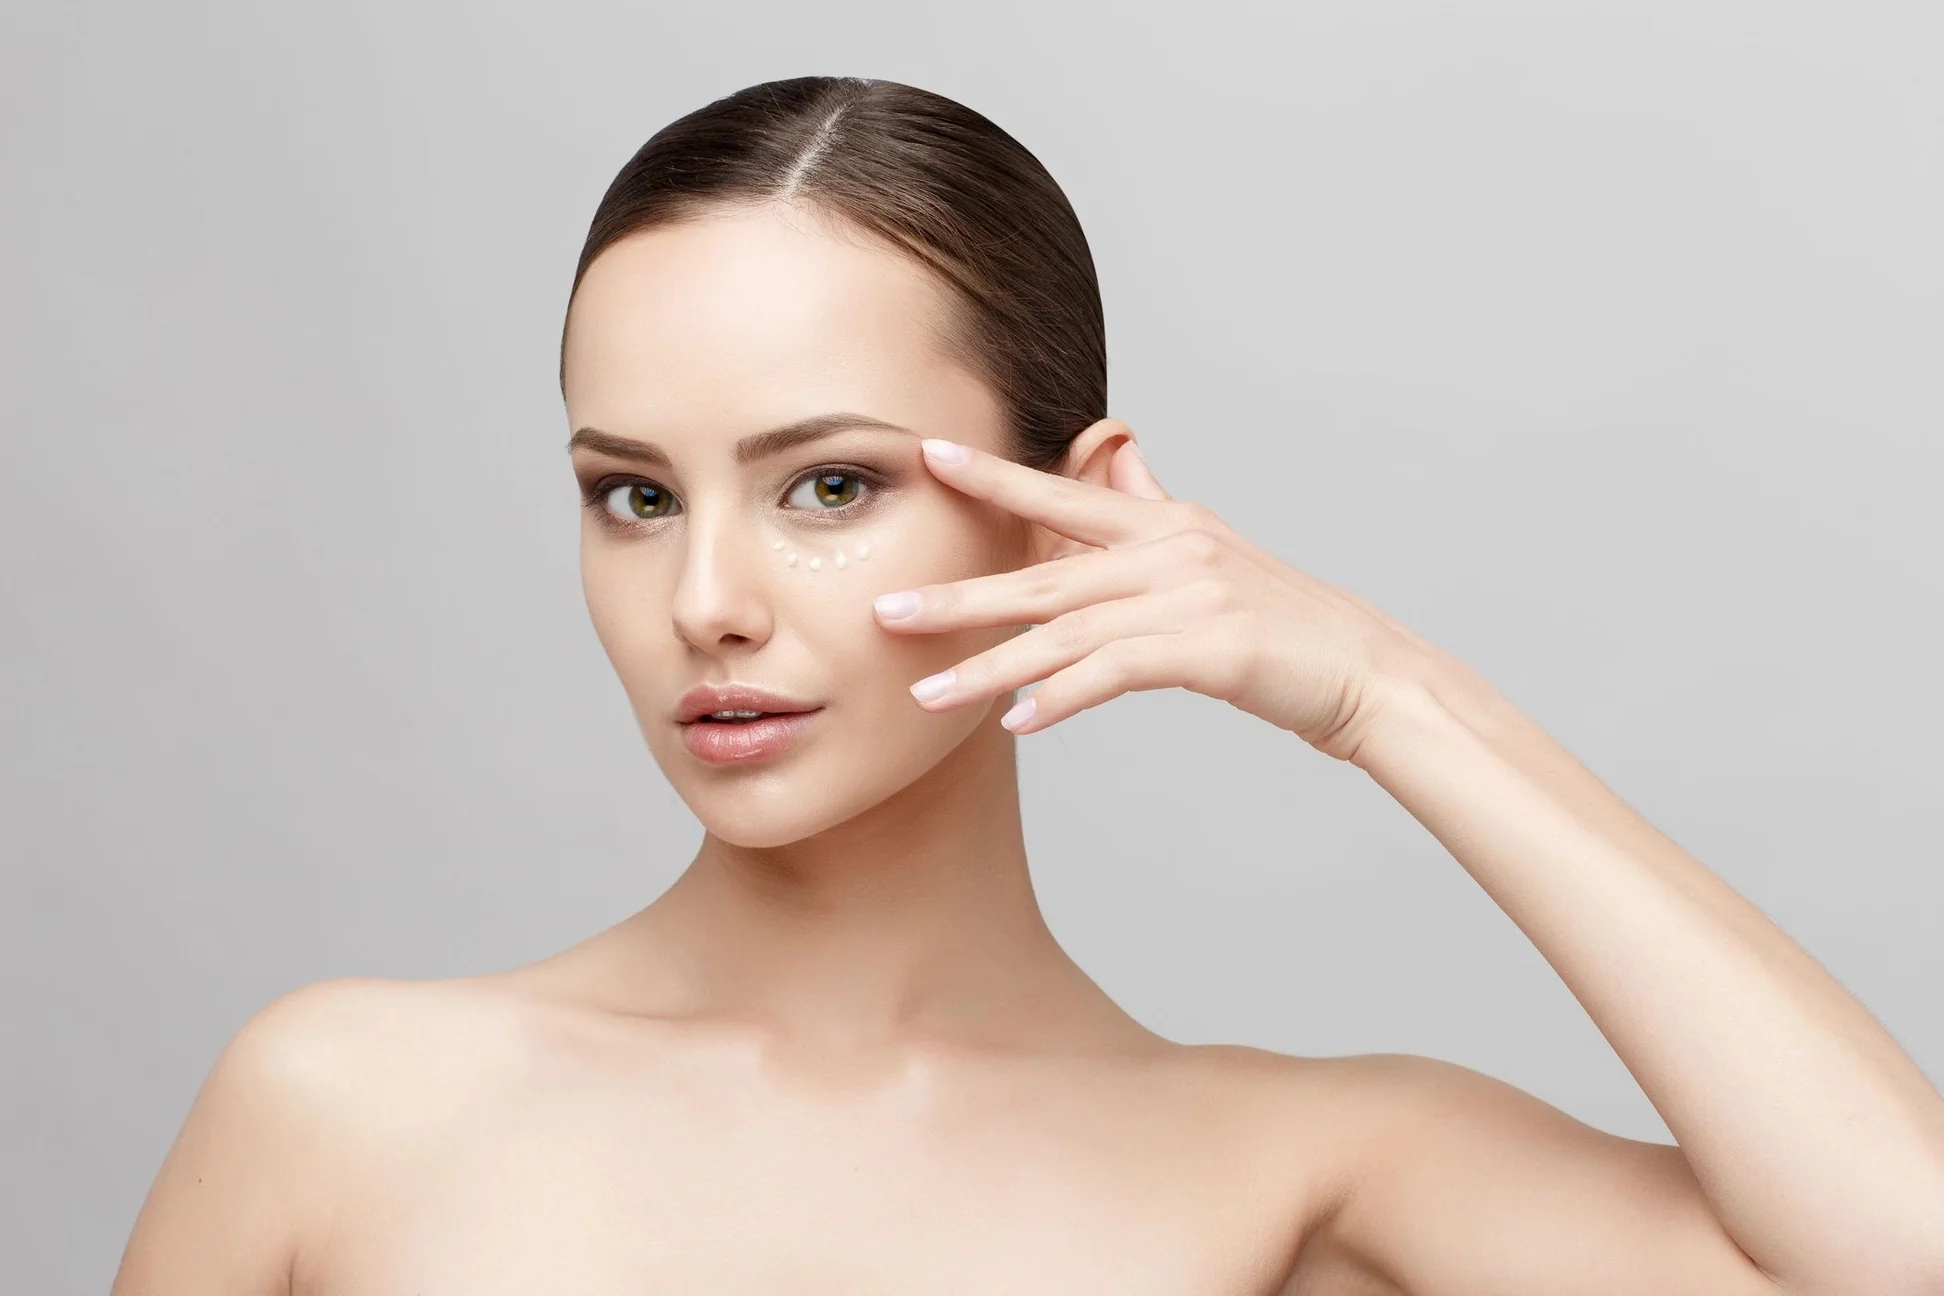 Treat Eyebags | New Look Skin Center Medical Spa in Glendale, Encino and Irvine, CA